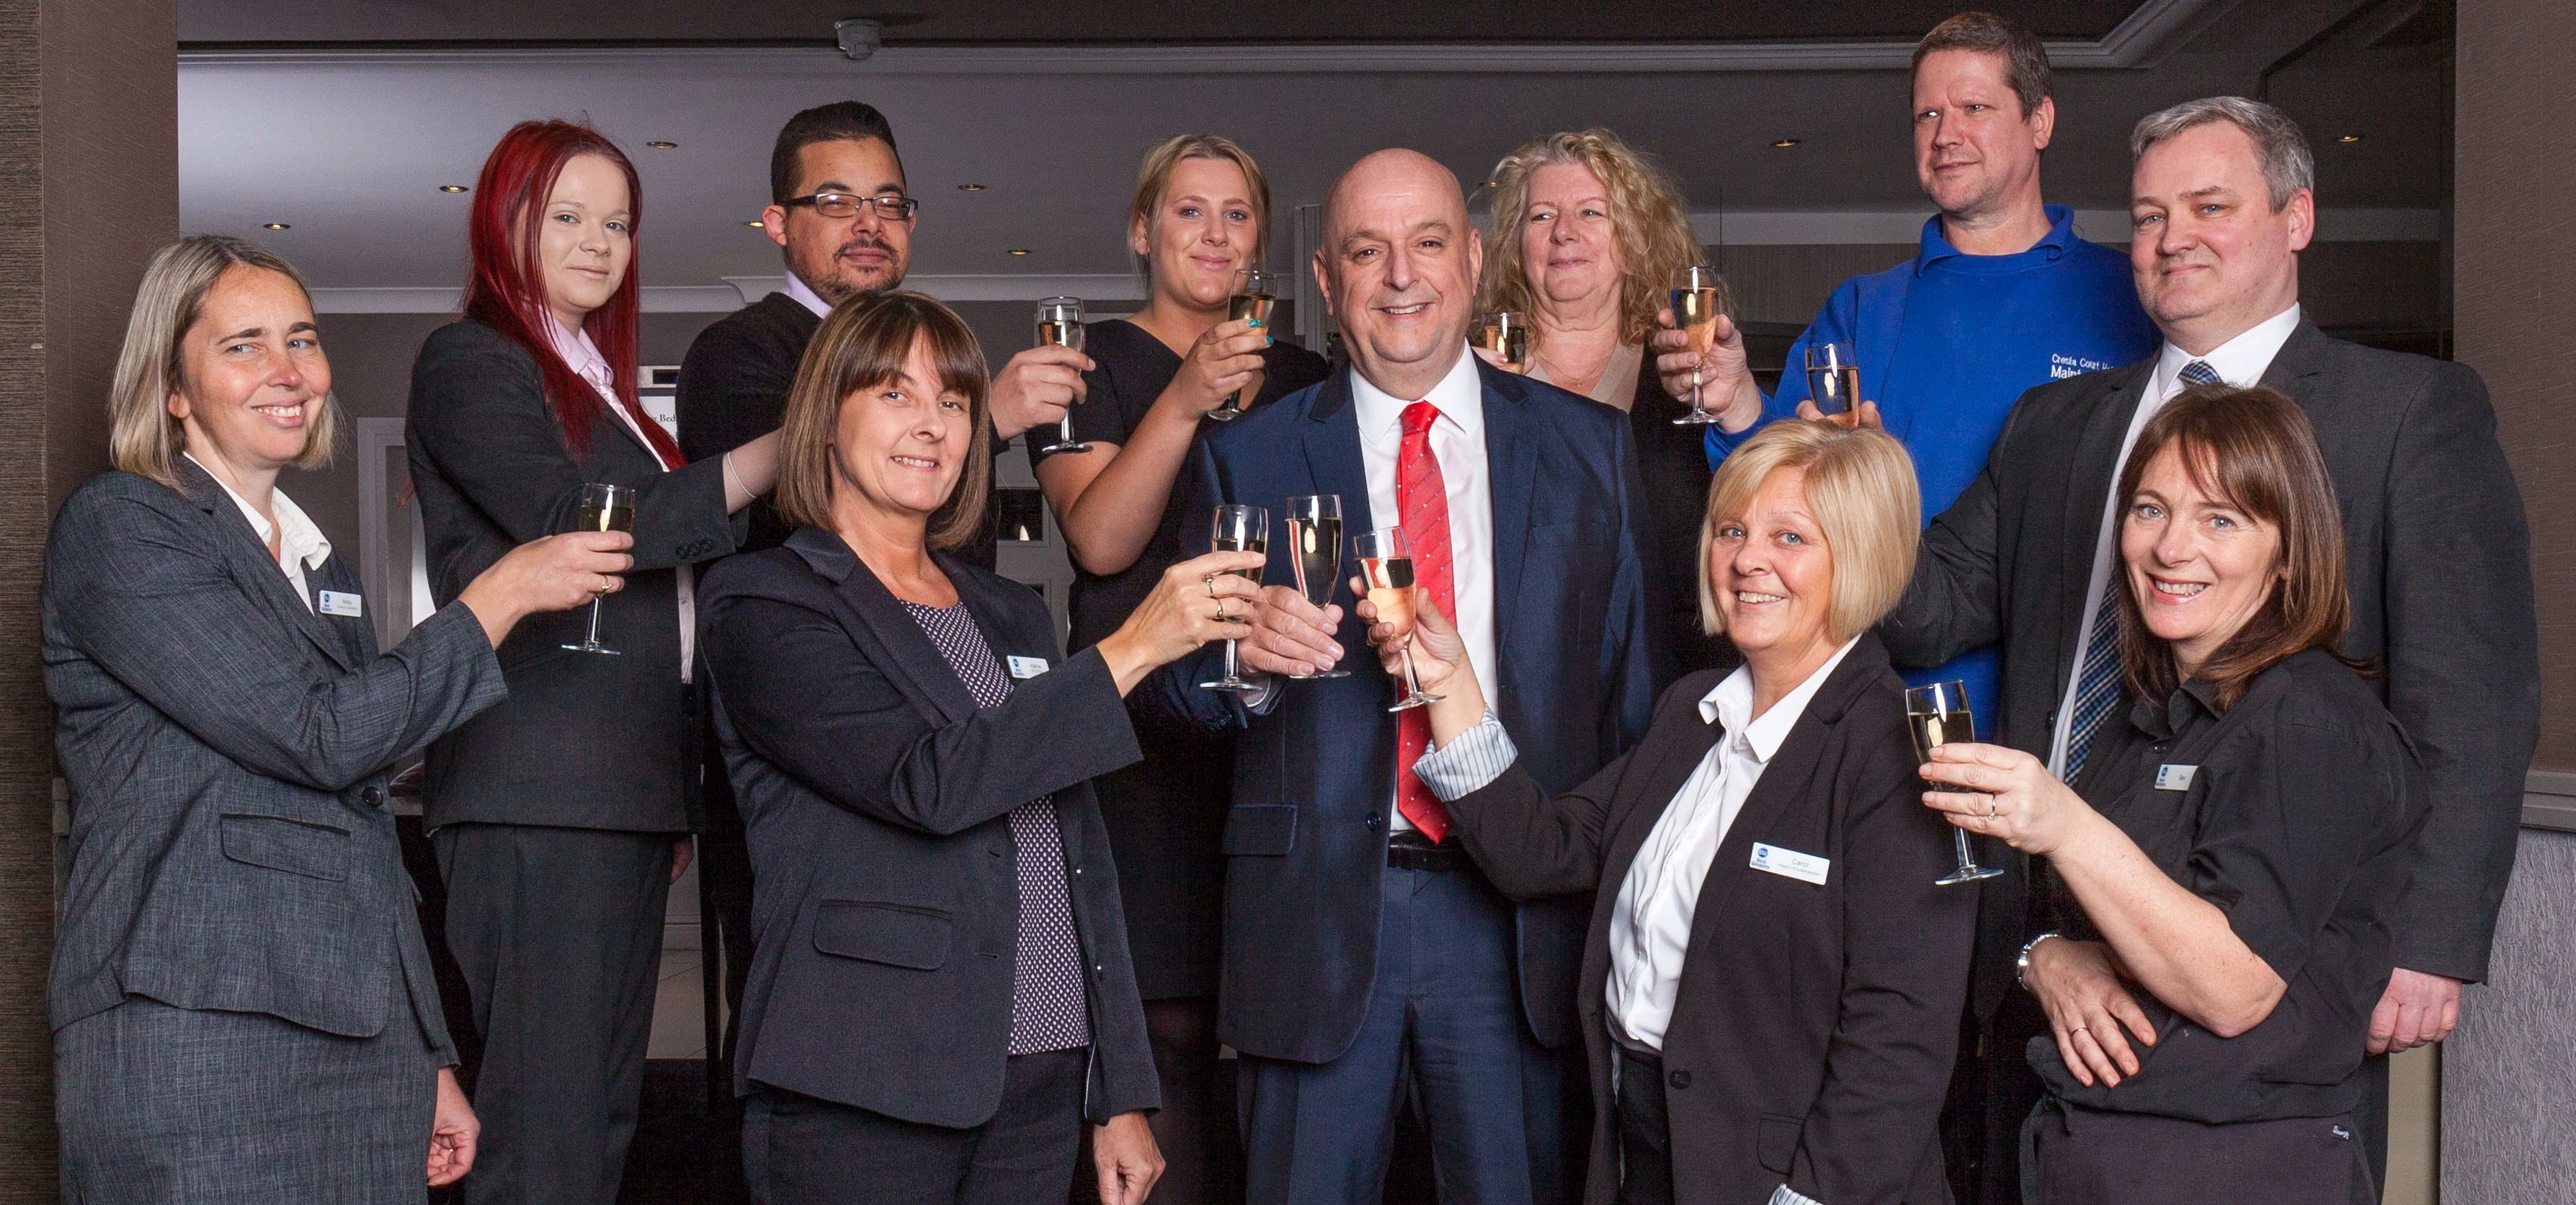 Paul Hindley and team celebrate his 20th year at the Best Western Cresta Court Hotel, Altrincham